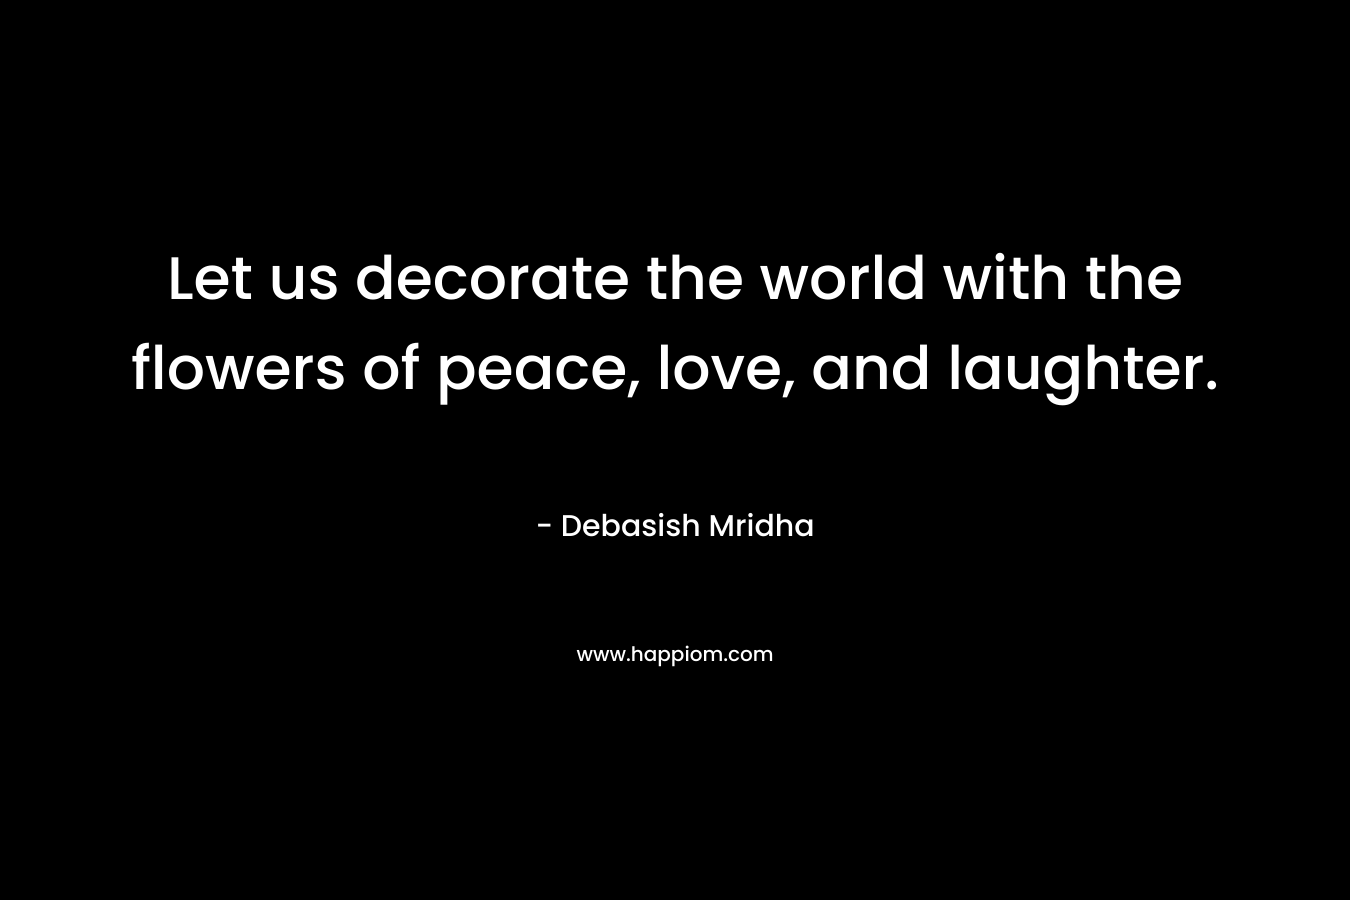 Let us decorate the world with the flowers of peace, love, and laughter.